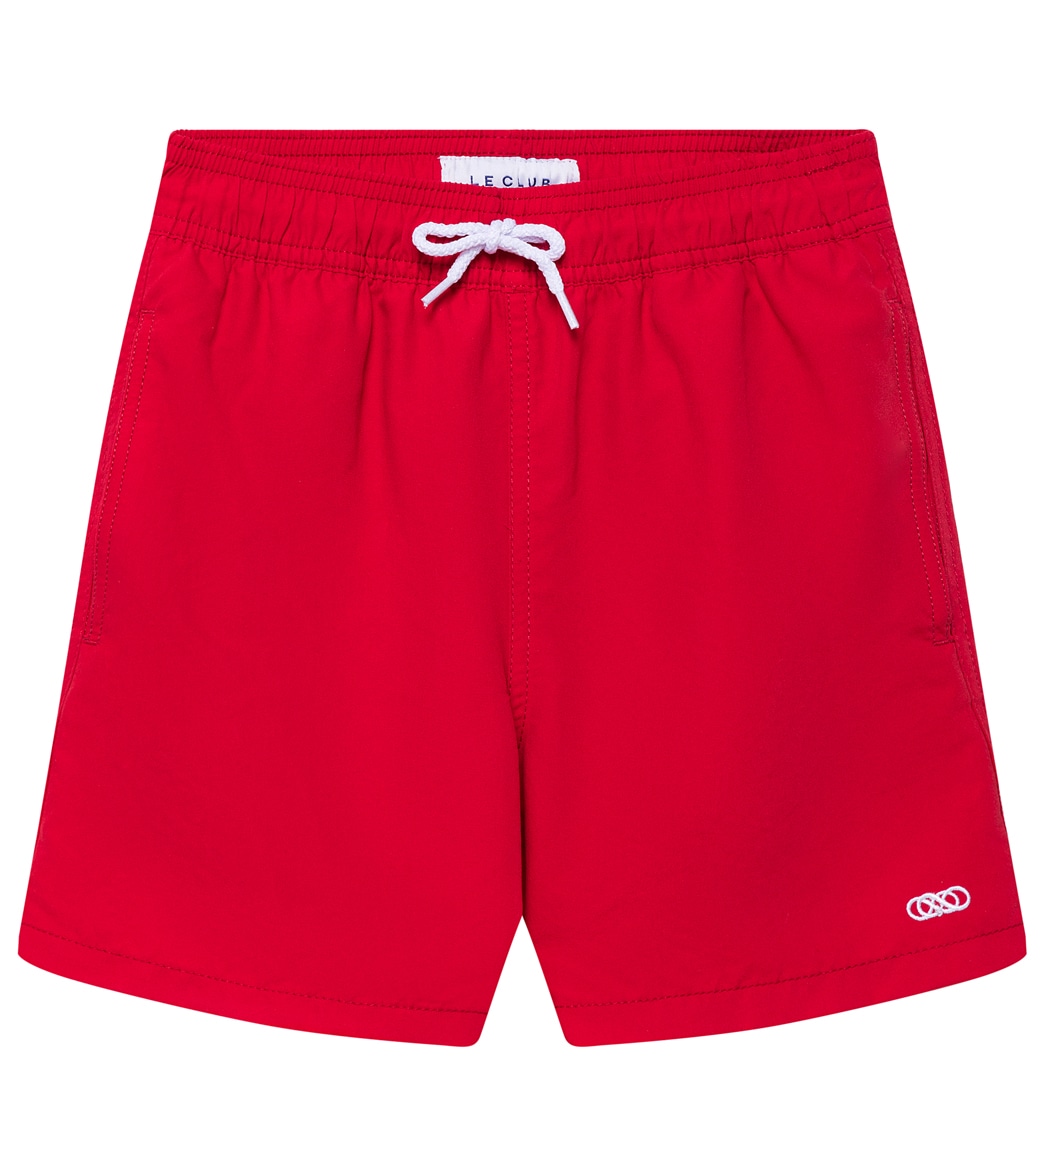 Le Club Boys' Classic Swim Trunks Toddler/Little/Big Kid - Red Large - Swimoutlet.com